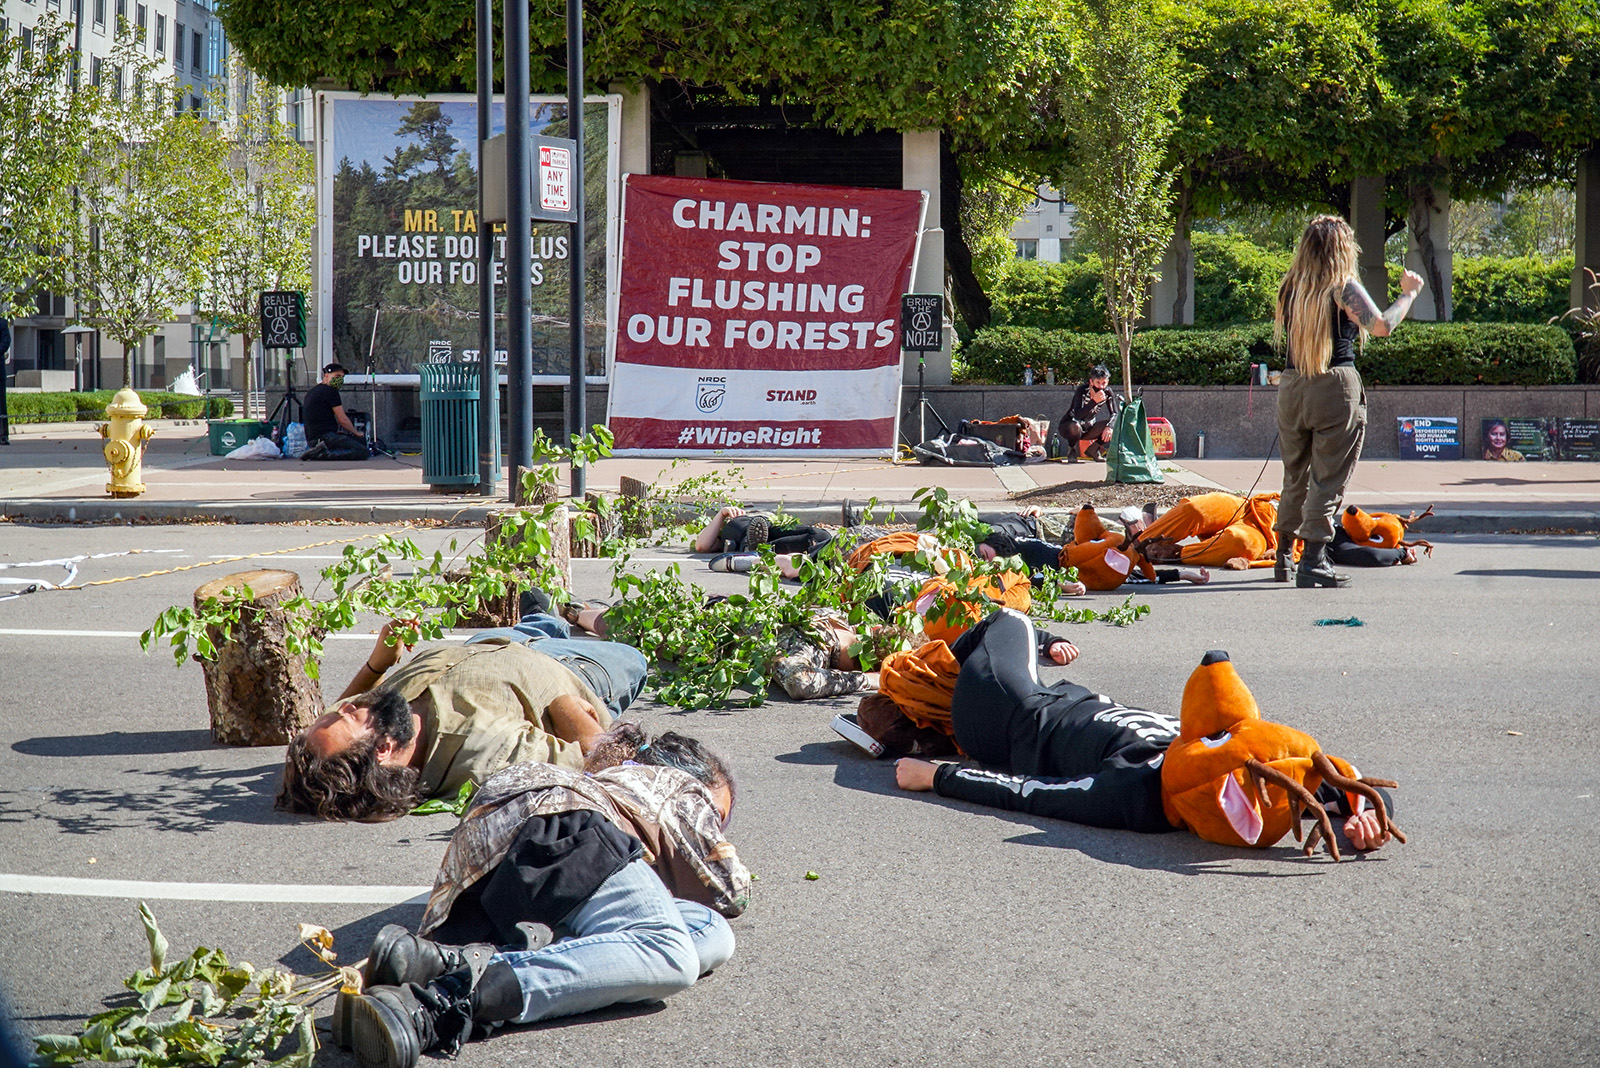 Activists demonstrate against alleged deforestation by Procter & Gamble outside company headquarters in Cincinnati, Ohio, on Oct. 12, 2021. Photo courtesy of Tina Gutierrez/Stand.earth